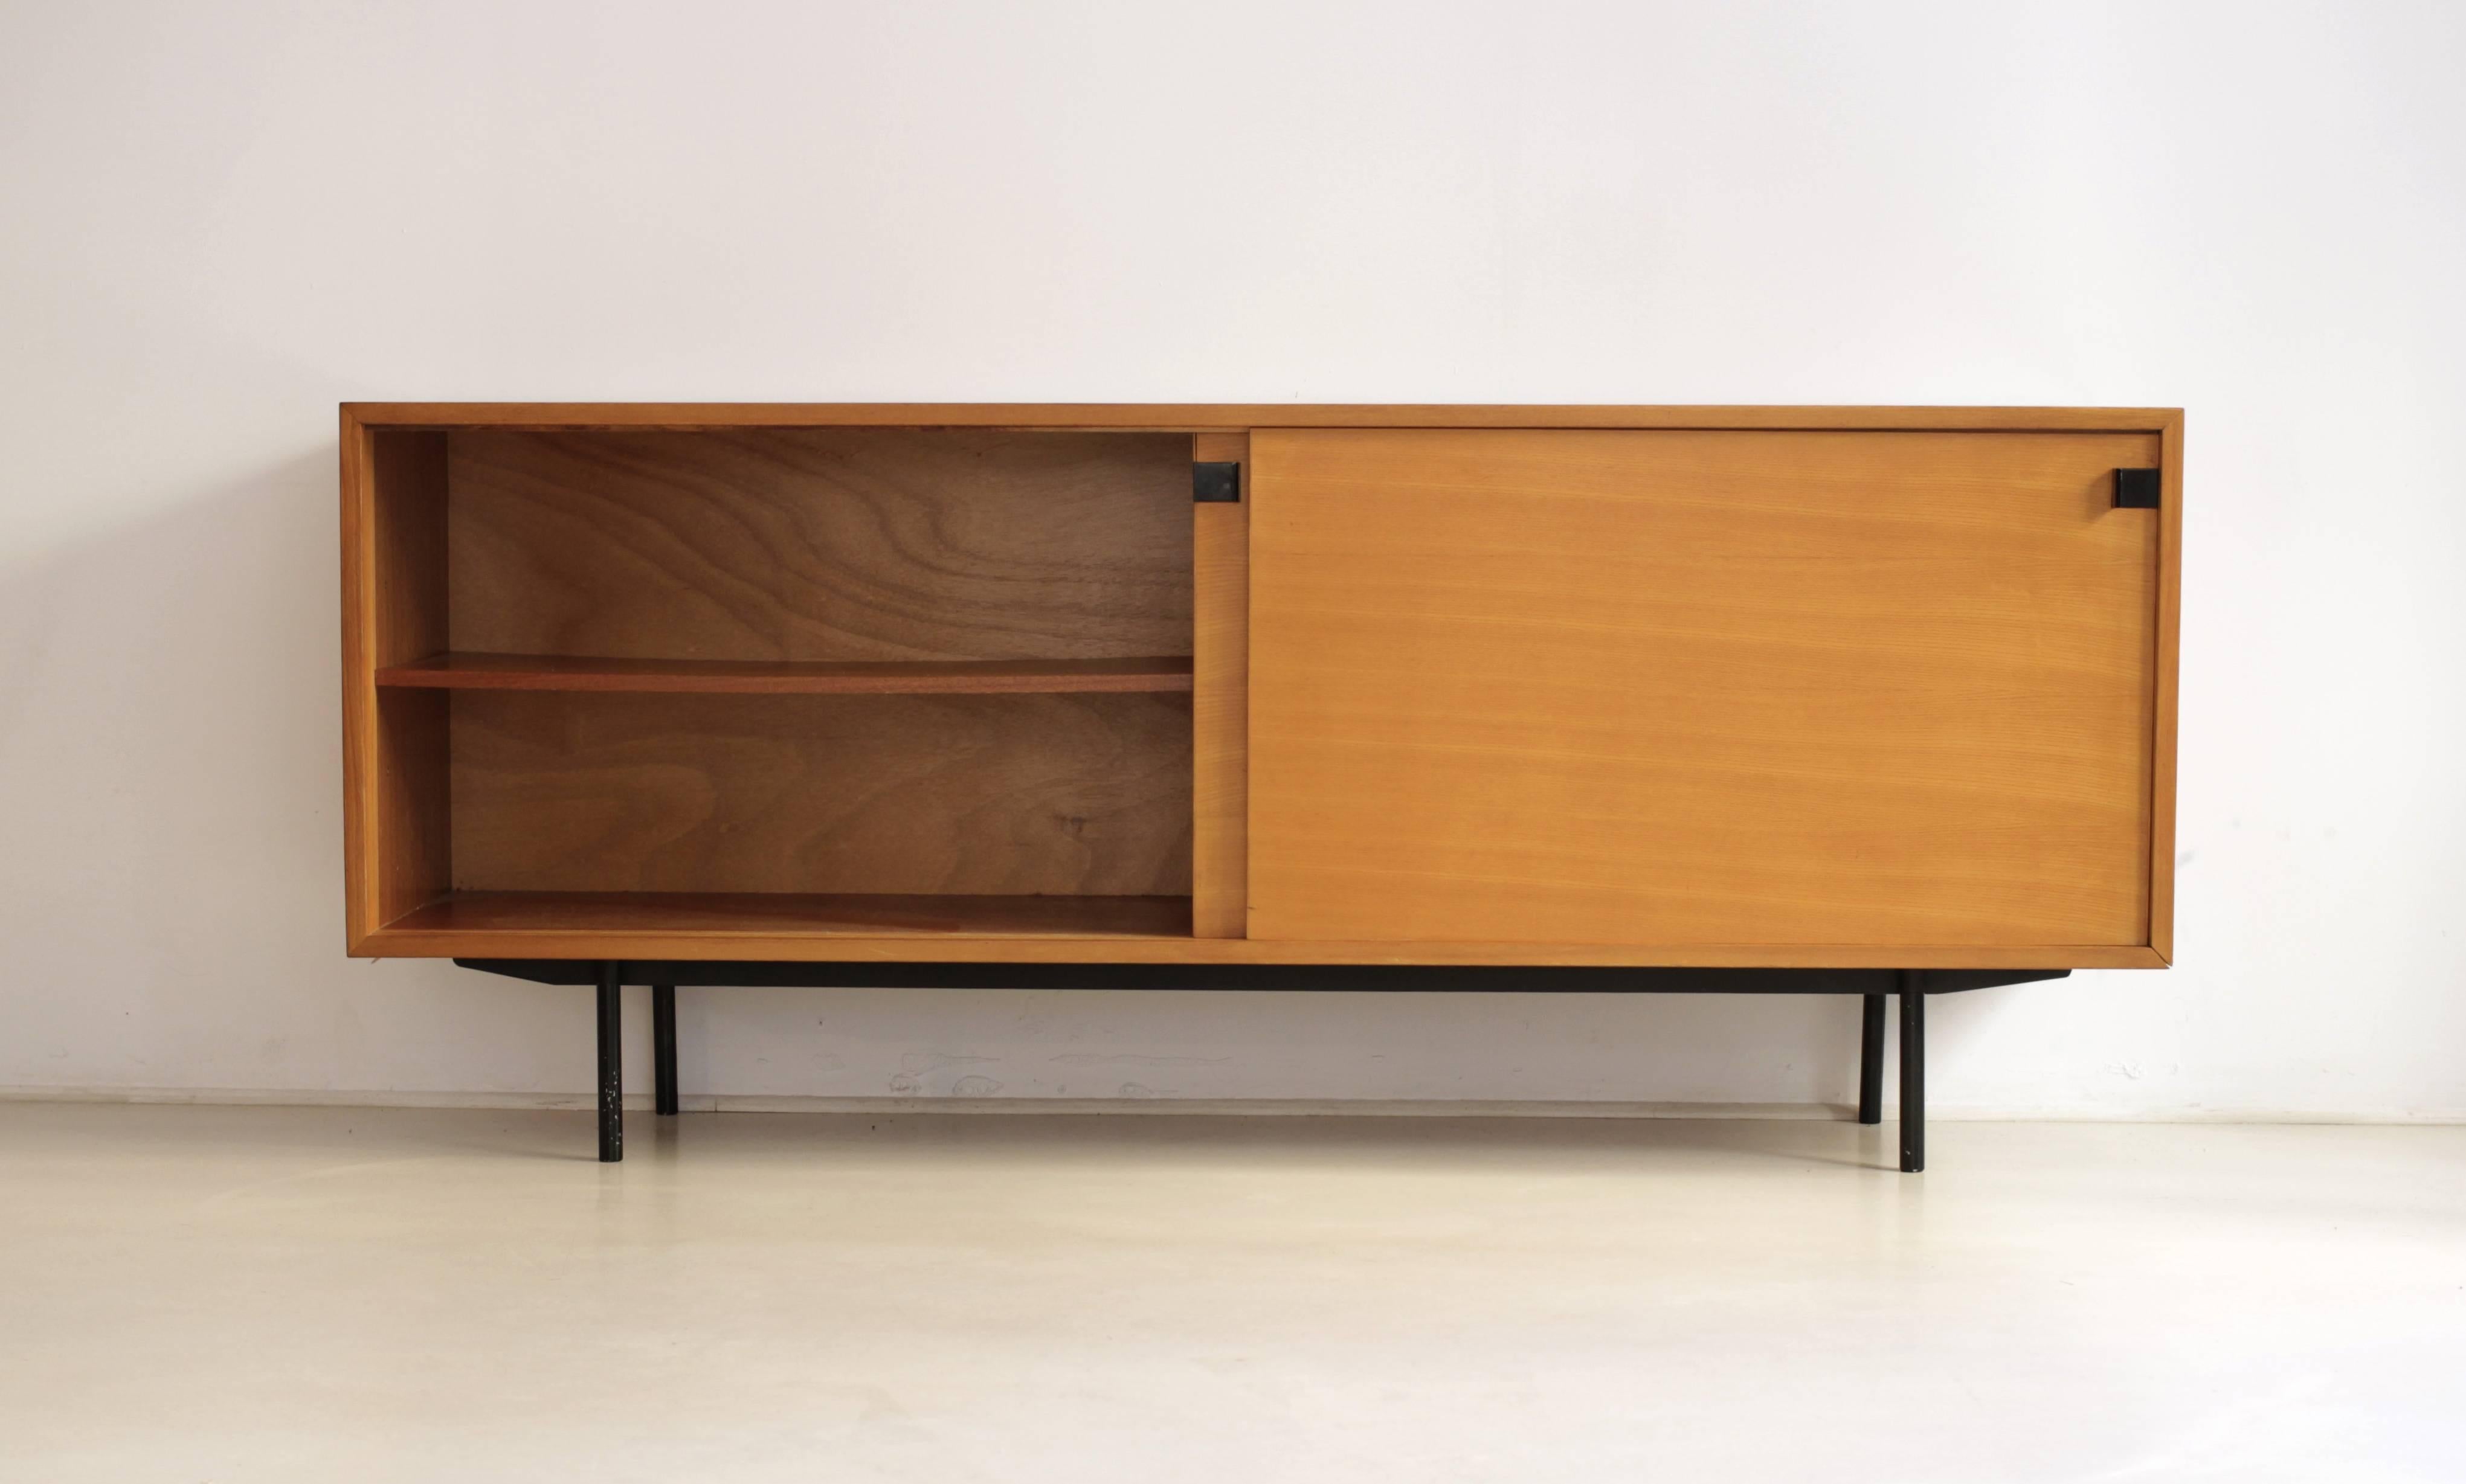 This Minimalist sideboard was designed by Alain Richard and manufactured by Meubles TV in France during the 1950s. It is made from elmwood veneer. The base is made of black lacquered metal.